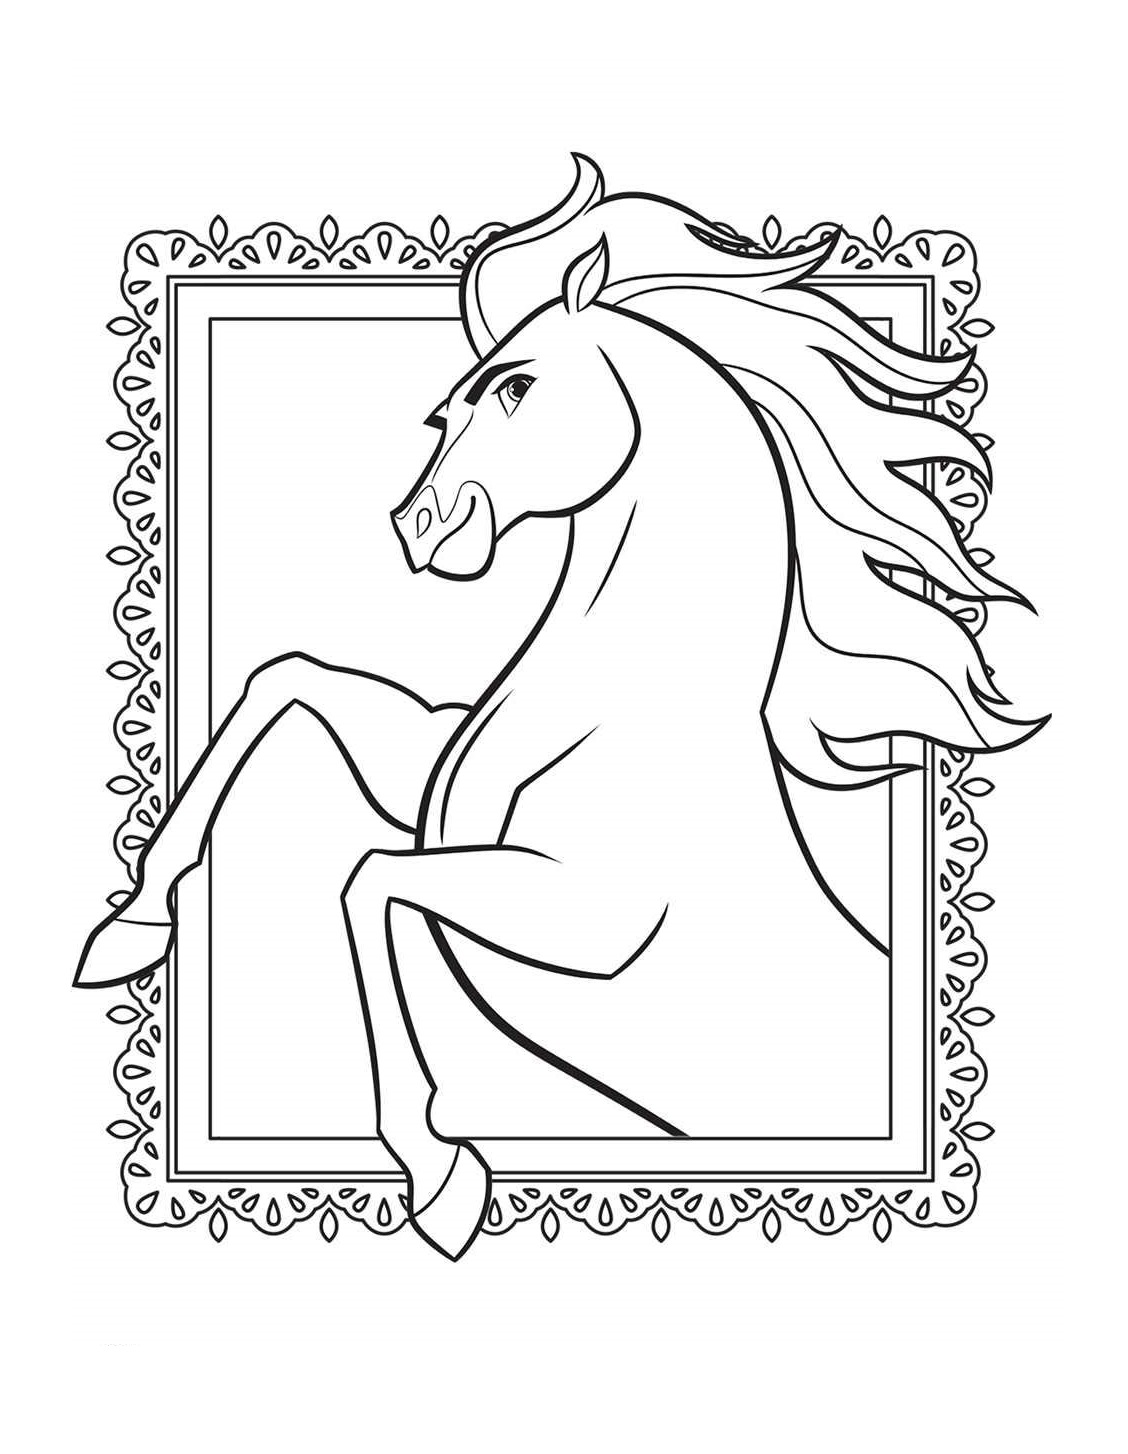 Spirit Untamed Coloring Pages From Book Cartoon Images